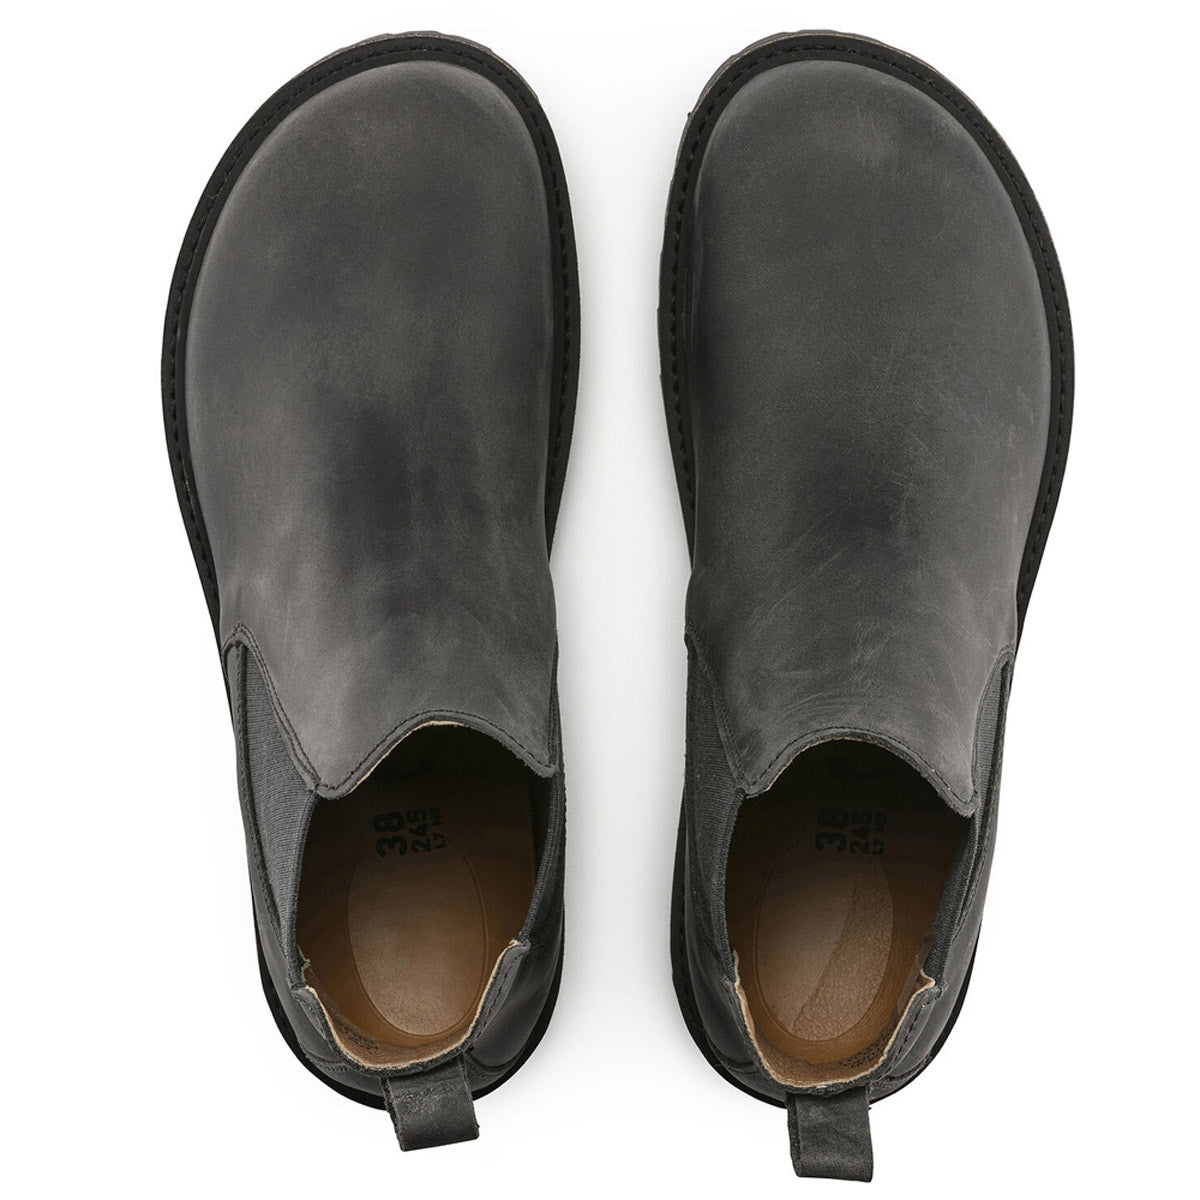 A pair of Birkenstock STALON GRAPHITE NUBUCK - WOMENS ankle boots viewed from above, crafted in oiled nubuck leather.